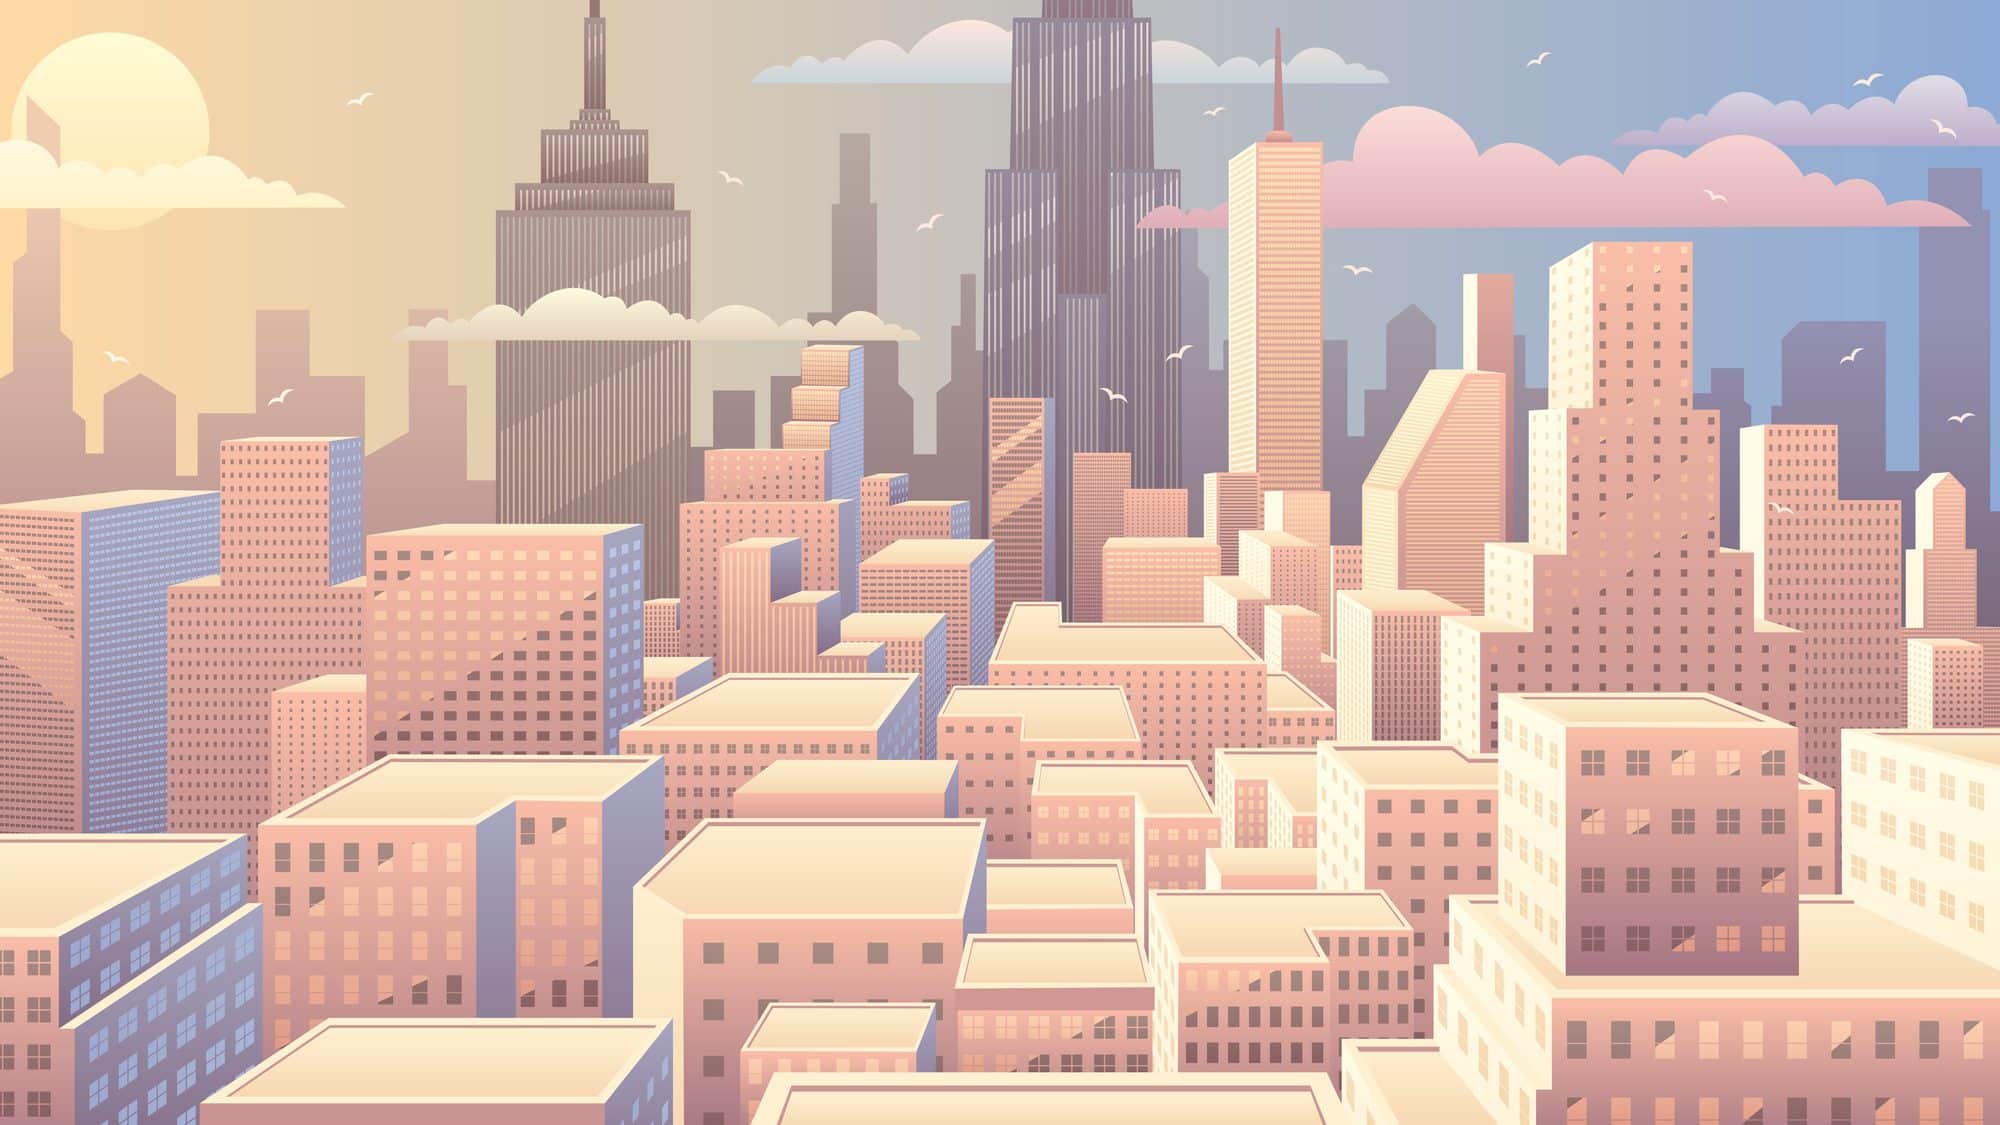 Cityscape at sunrise. Basic (linear) gradients used. No transparency. comic book illustrations